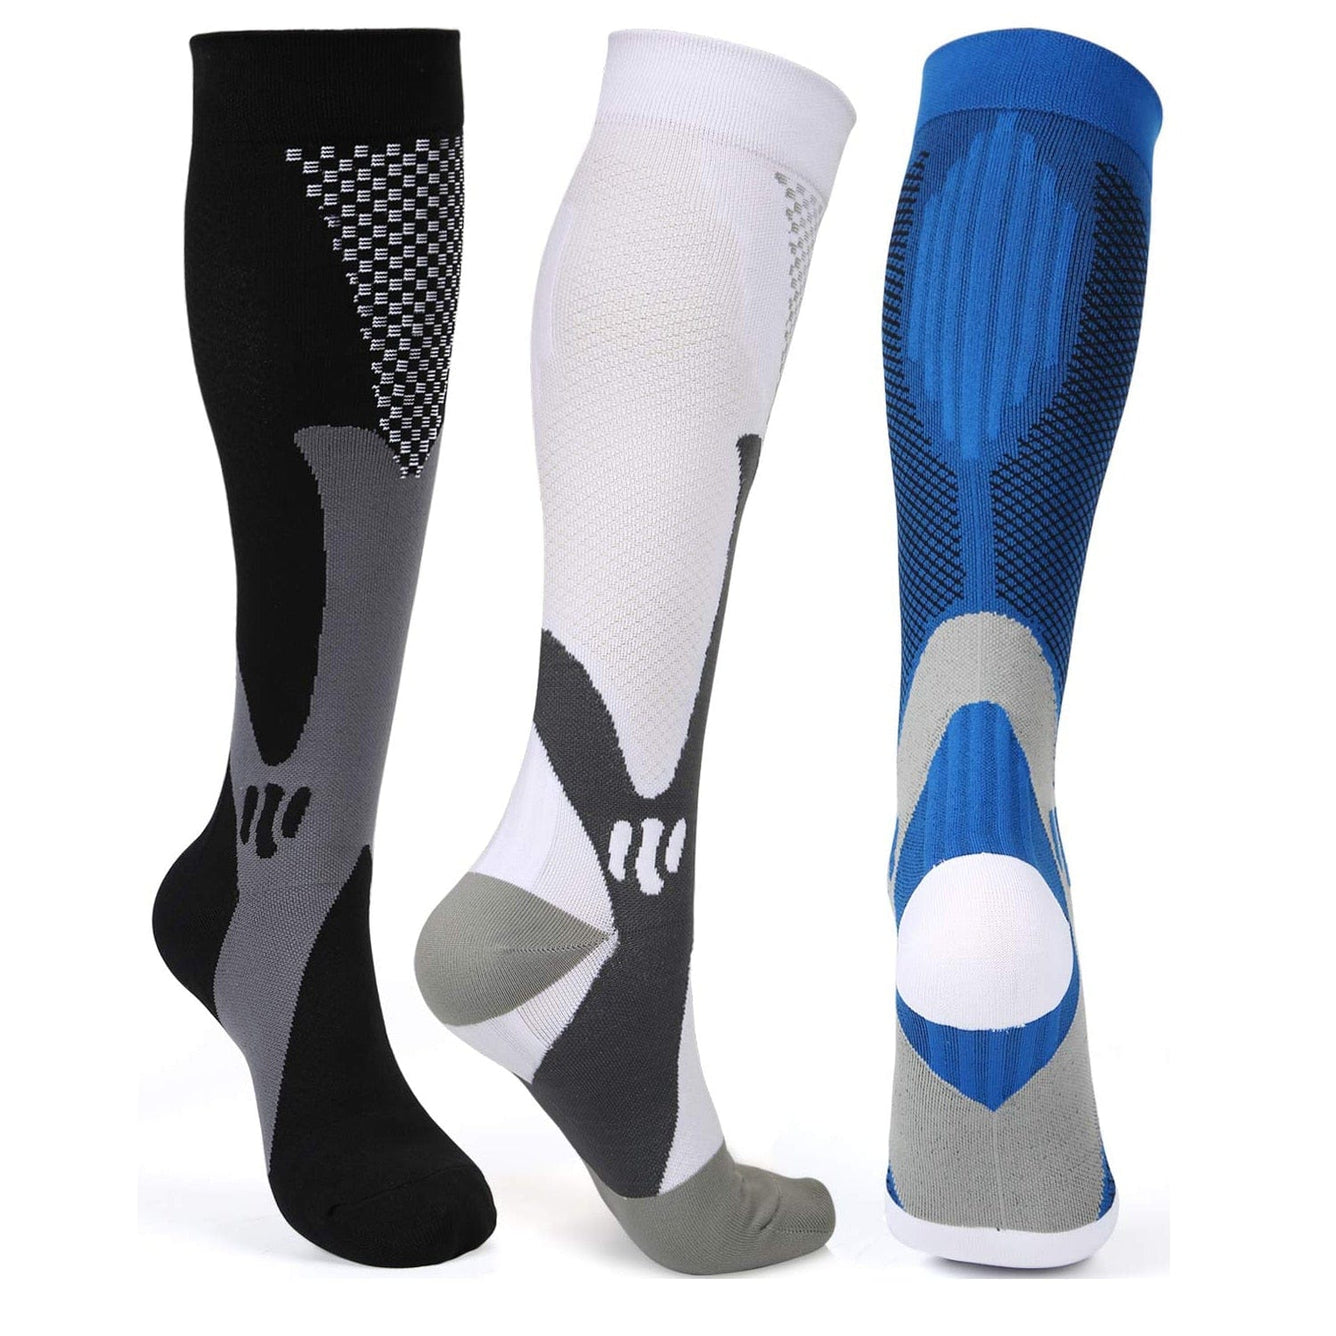 Supportive Compression Socks For Men and Women – My Vital Flows